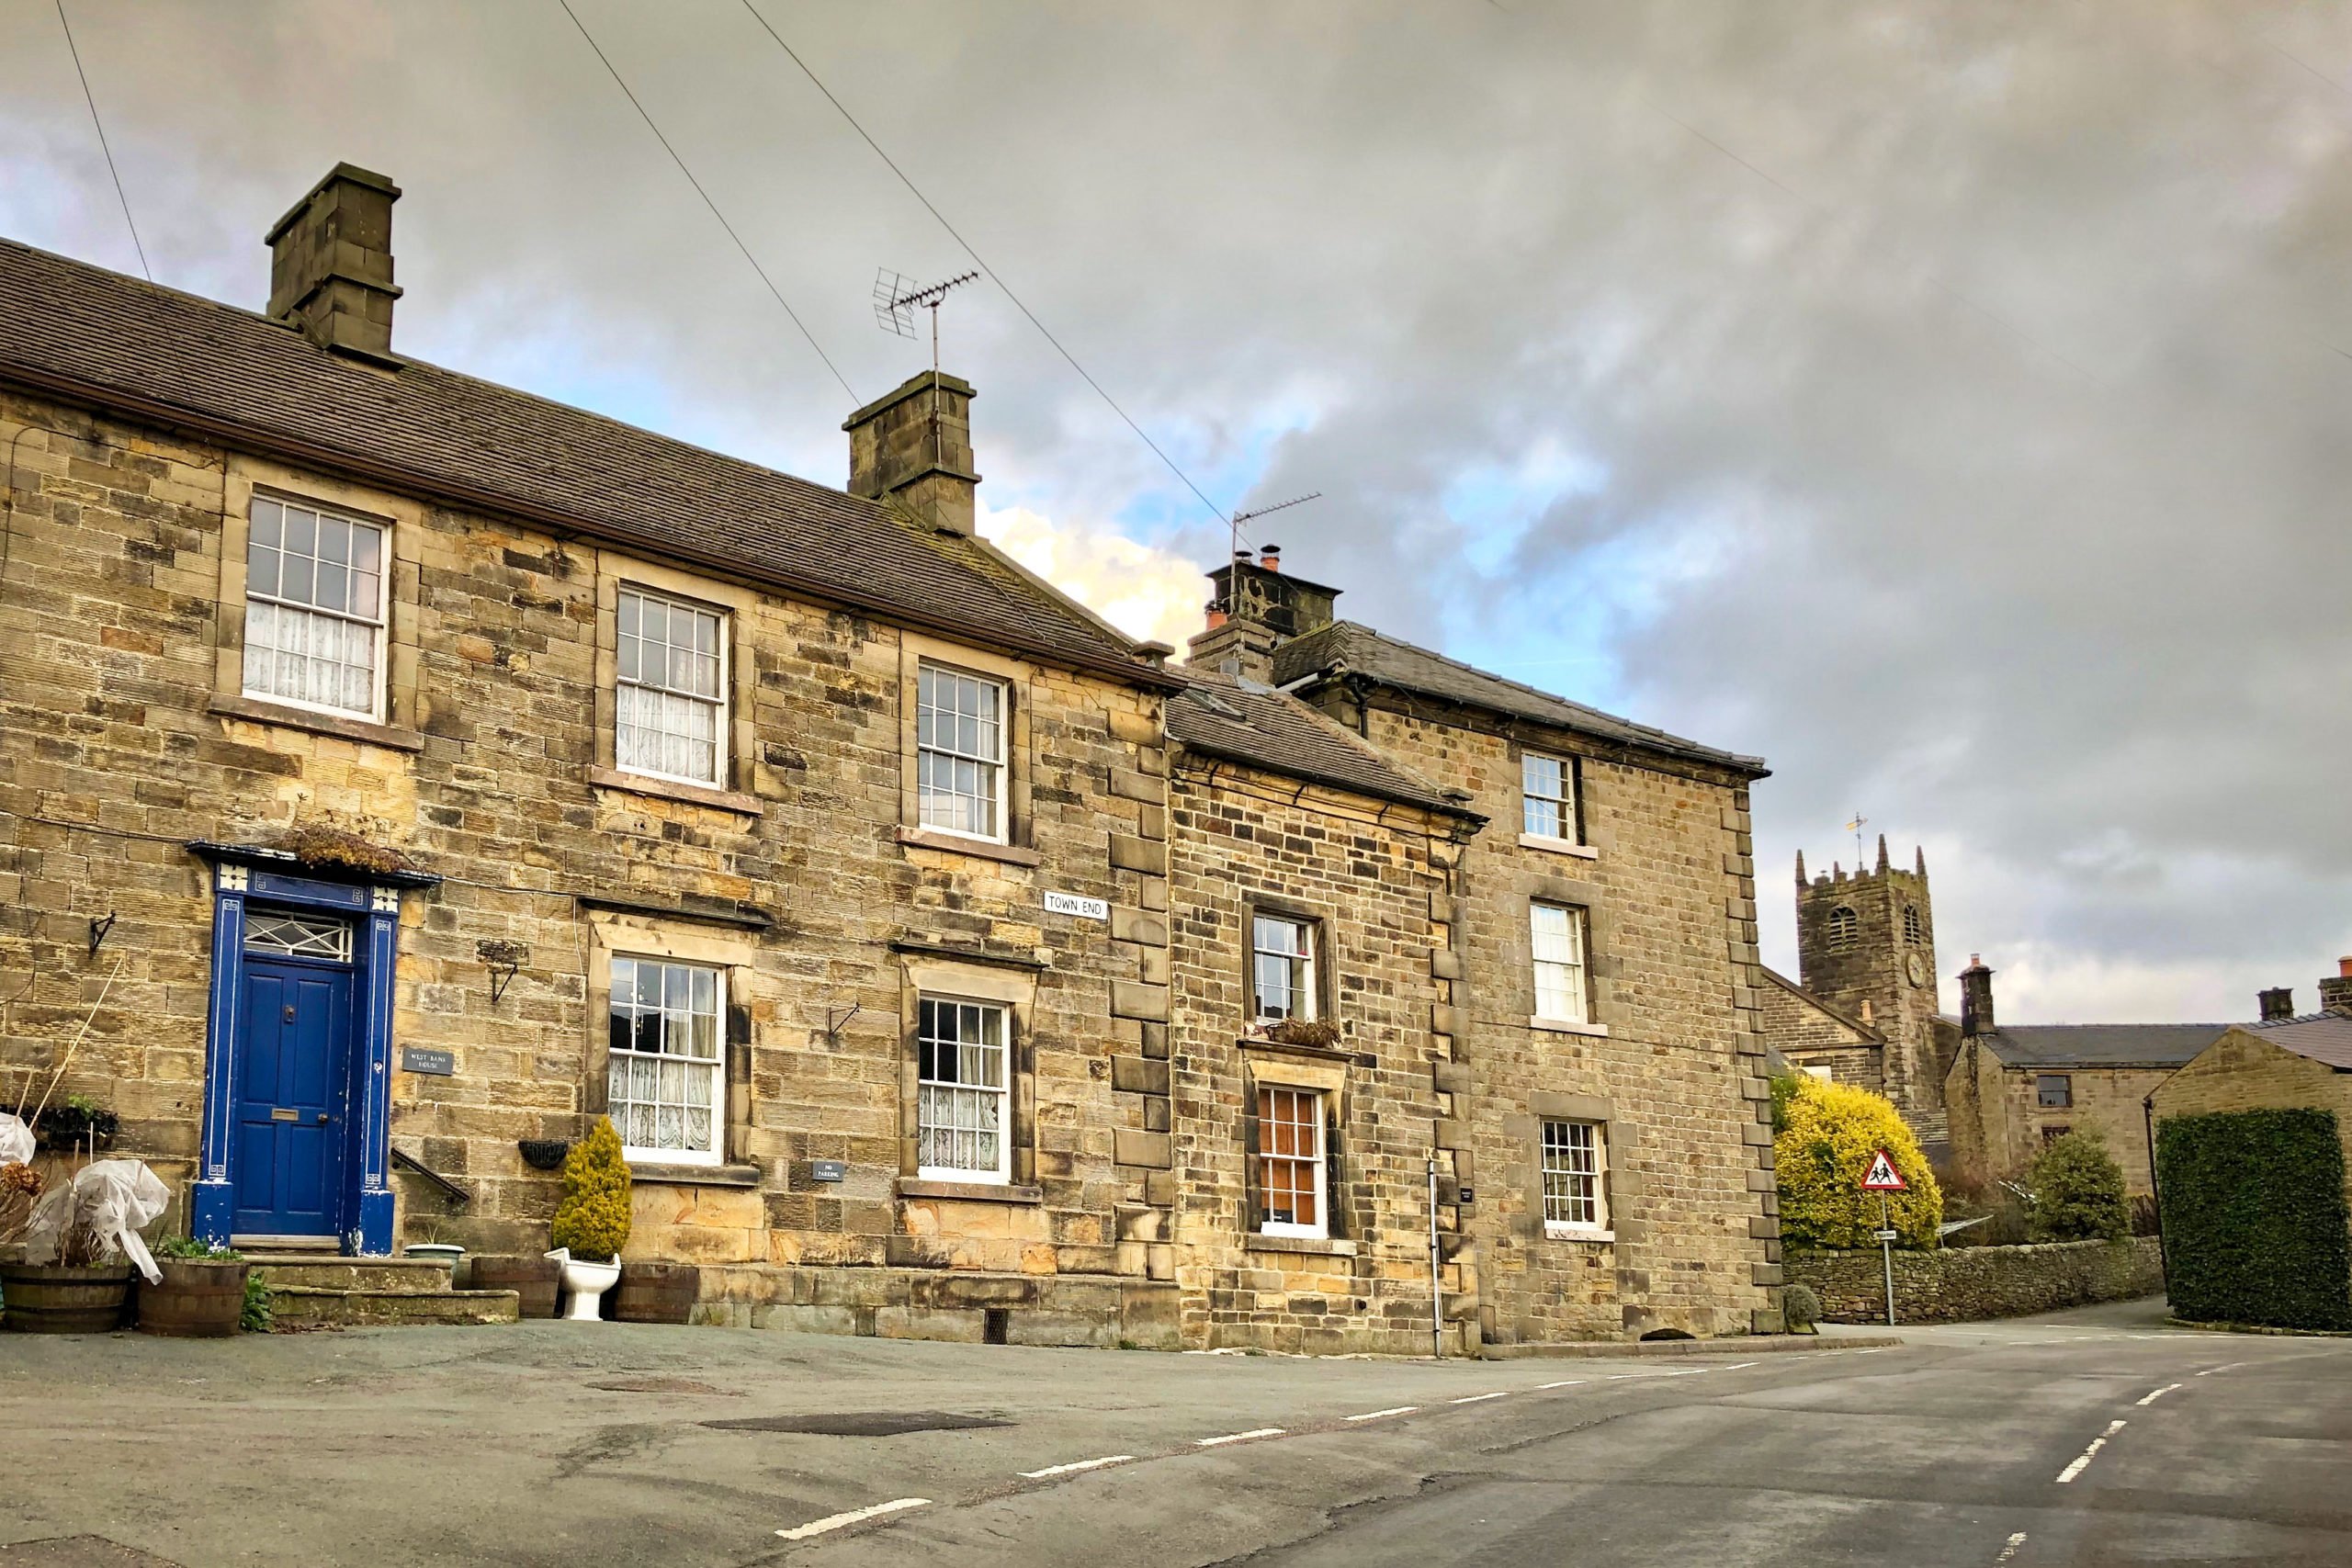 70 Best Days Out in the Peak District: Longnor 1